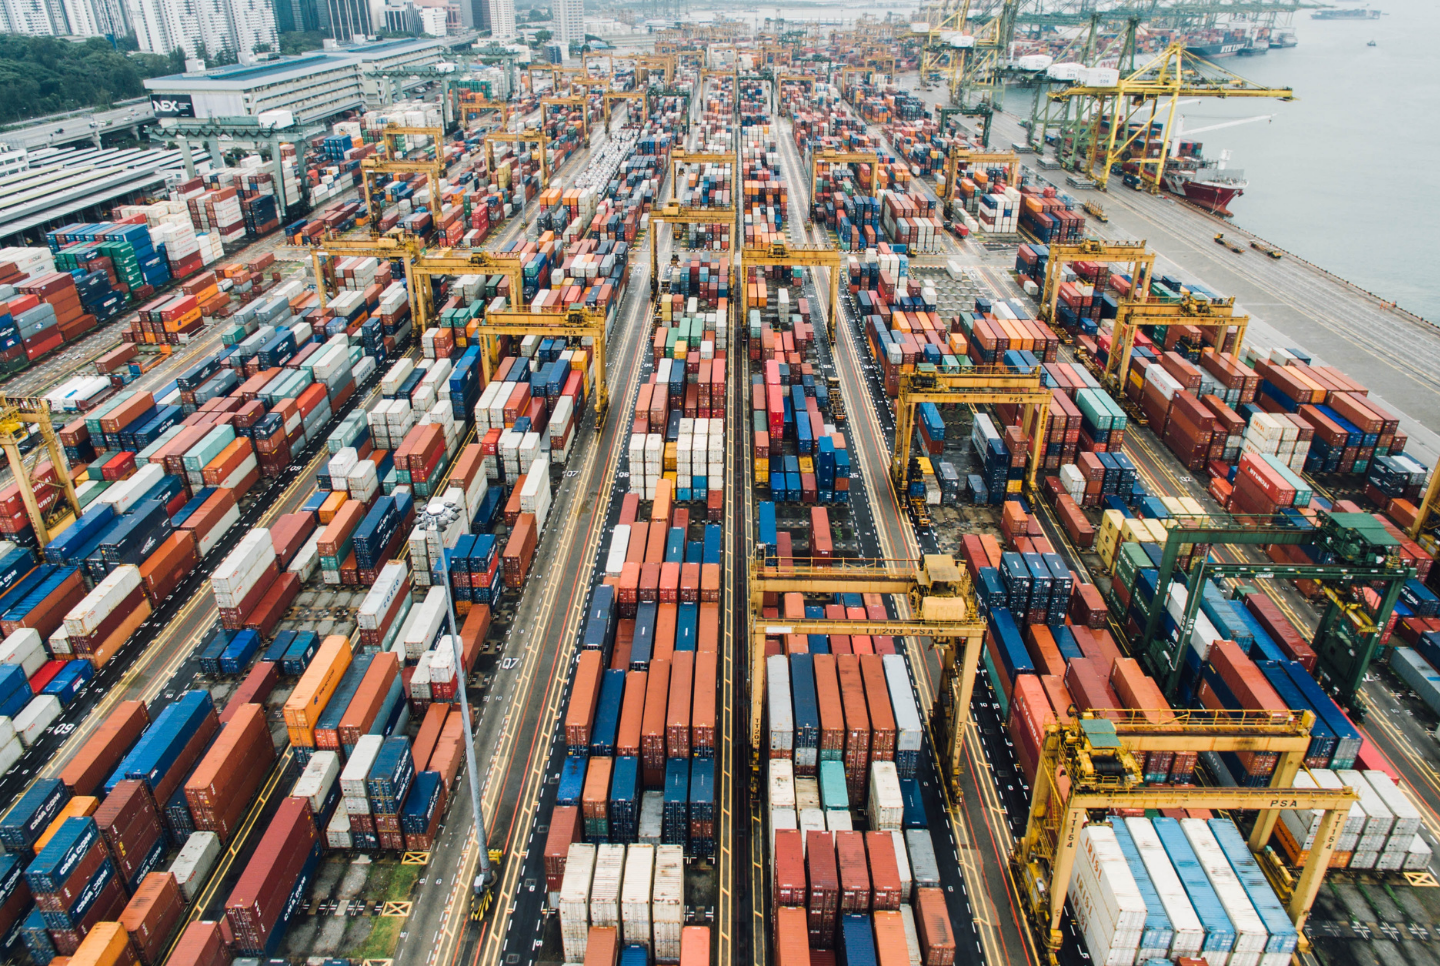 Cargo containers lay in a shipyard. Qwyk, the digital freight start-up, has signed an agreement with Chain.io, the logistics integration platform for 3PLs, digital forwarders, shippers and SaaS providers.